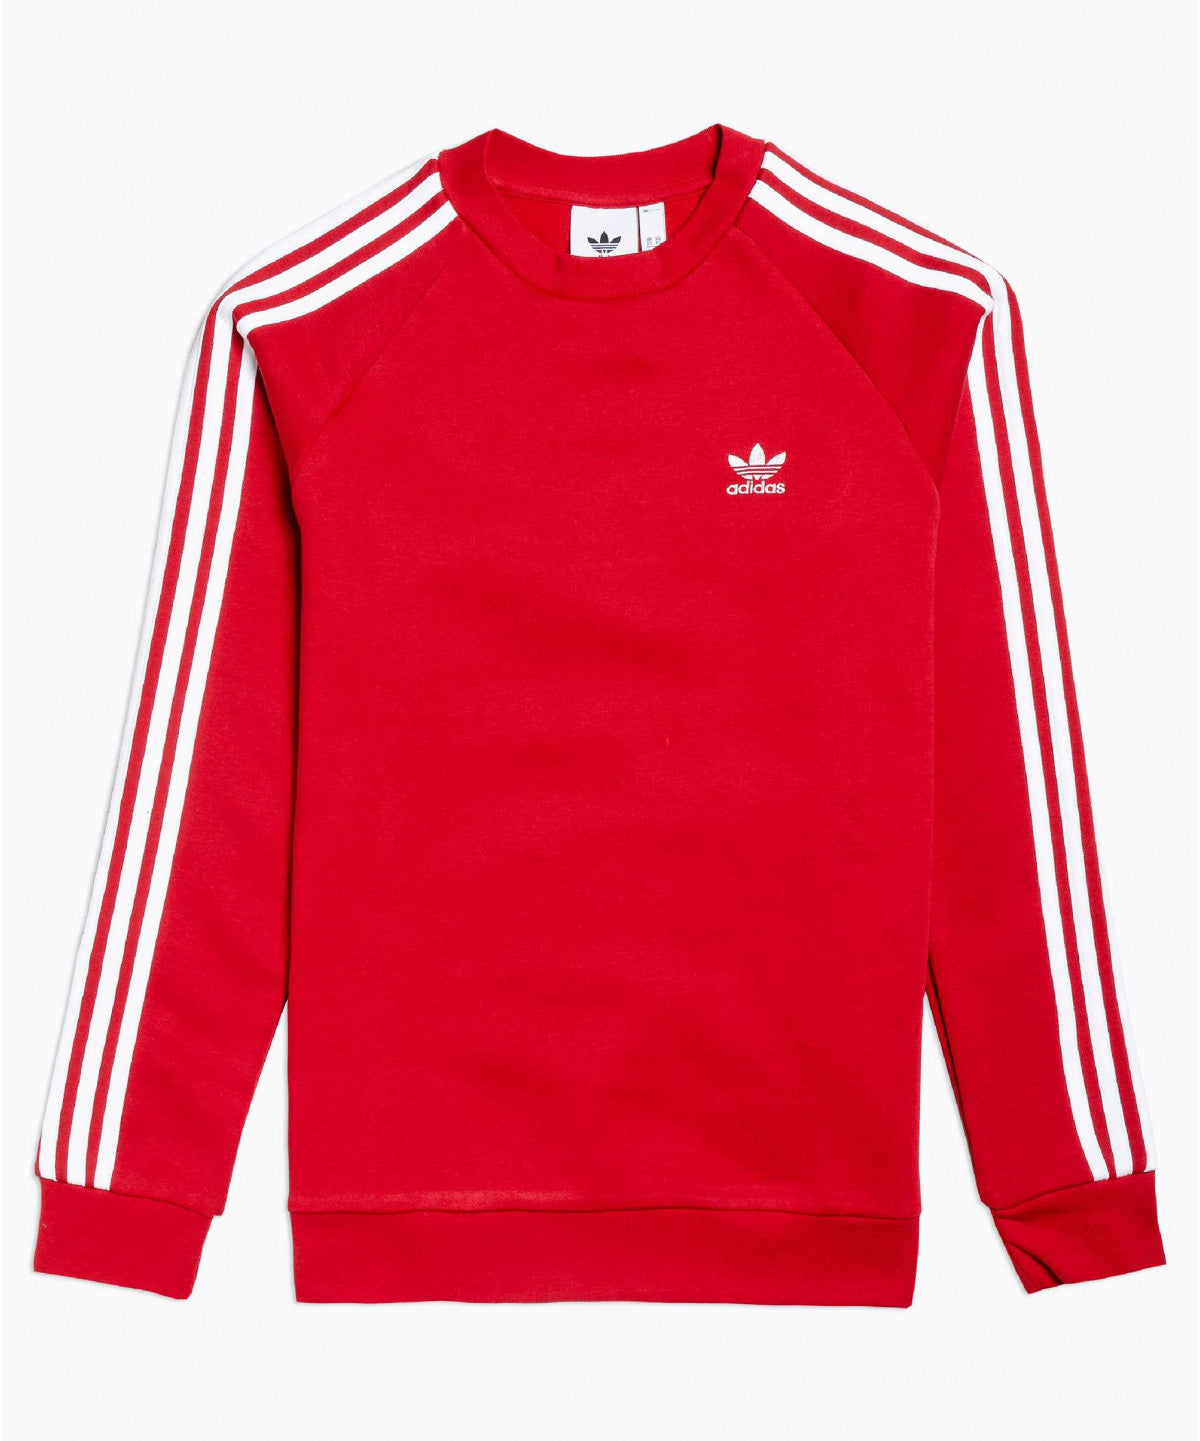 red and white adidas sweat suit